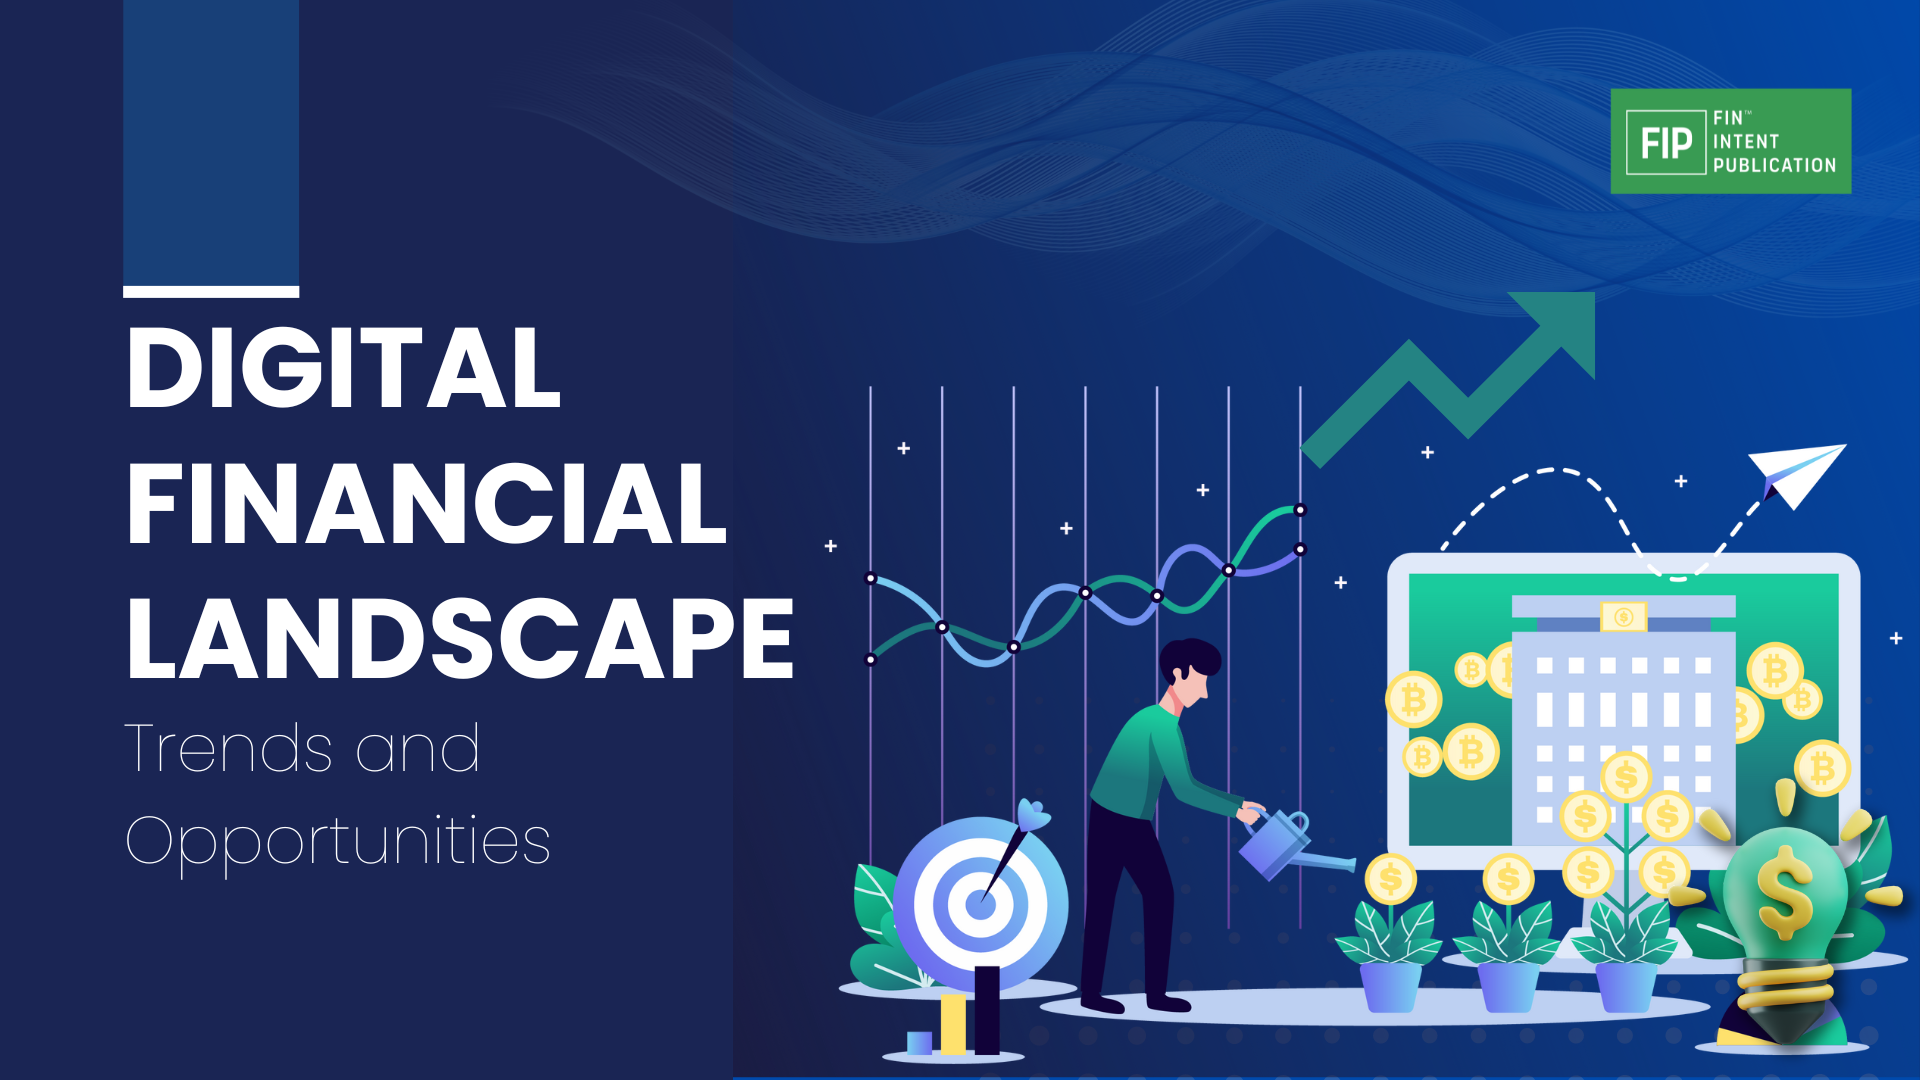 Digital Financial Landscape: Trends and Opportunities 